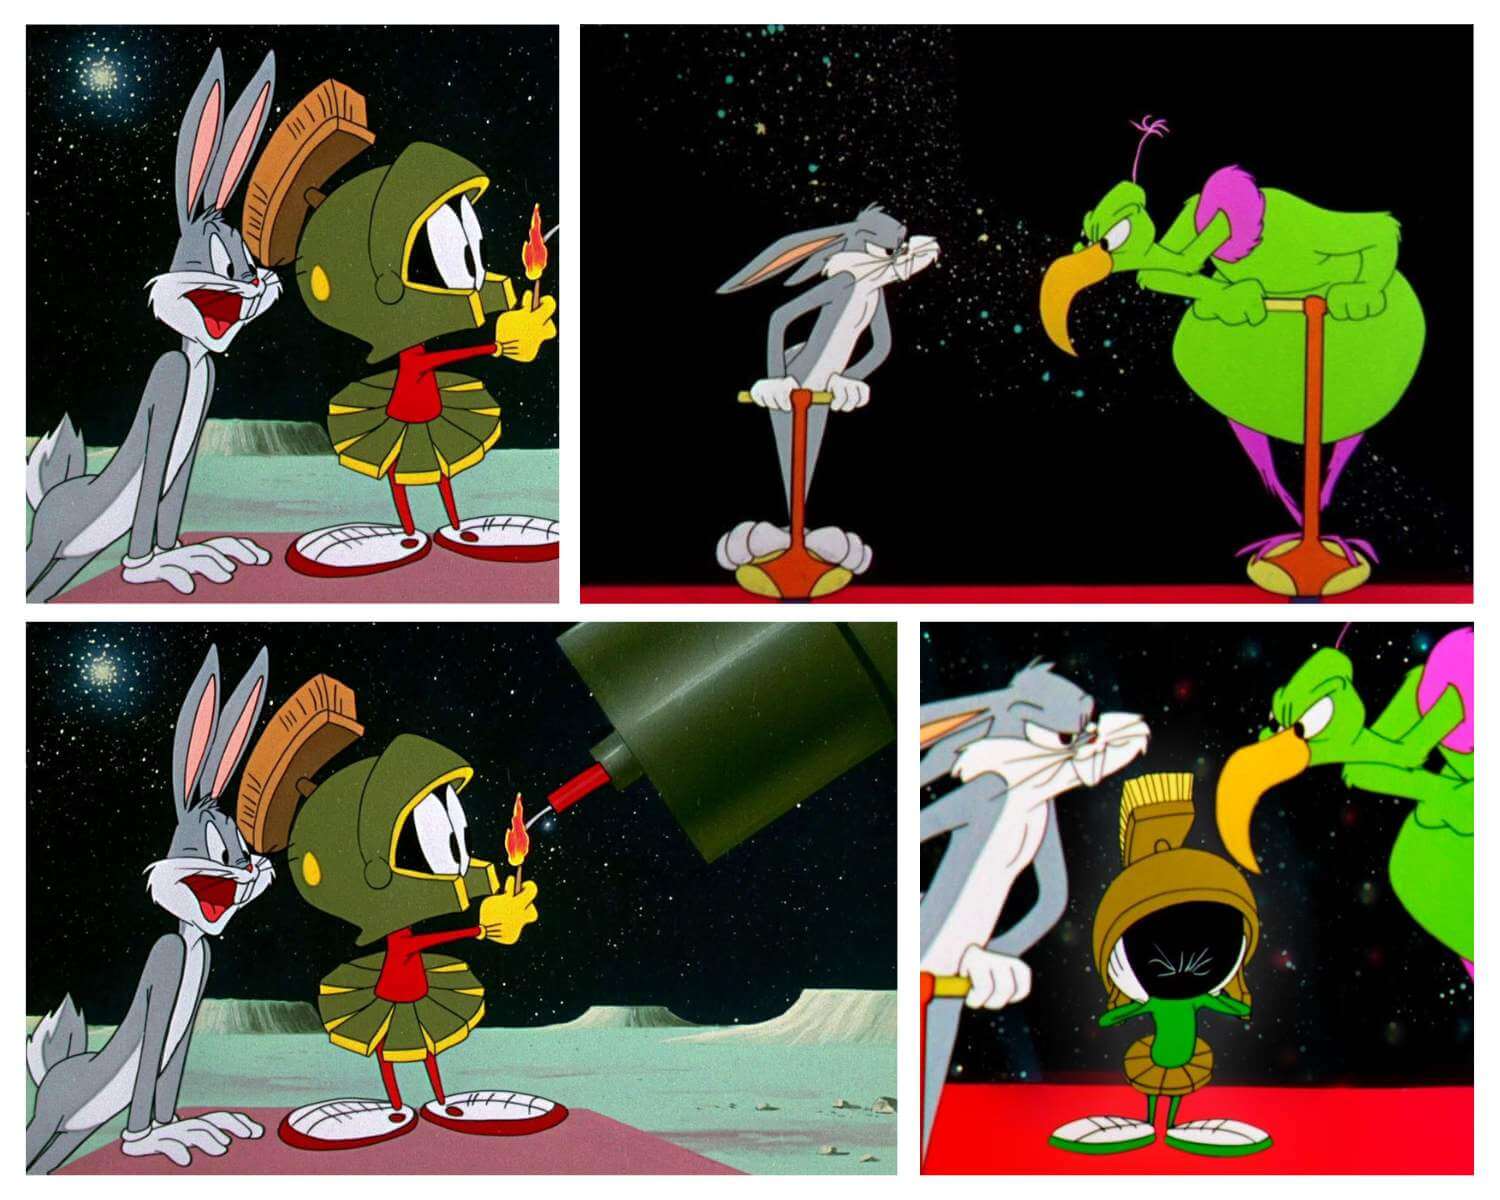 Bugs Bunny and Instant Martian